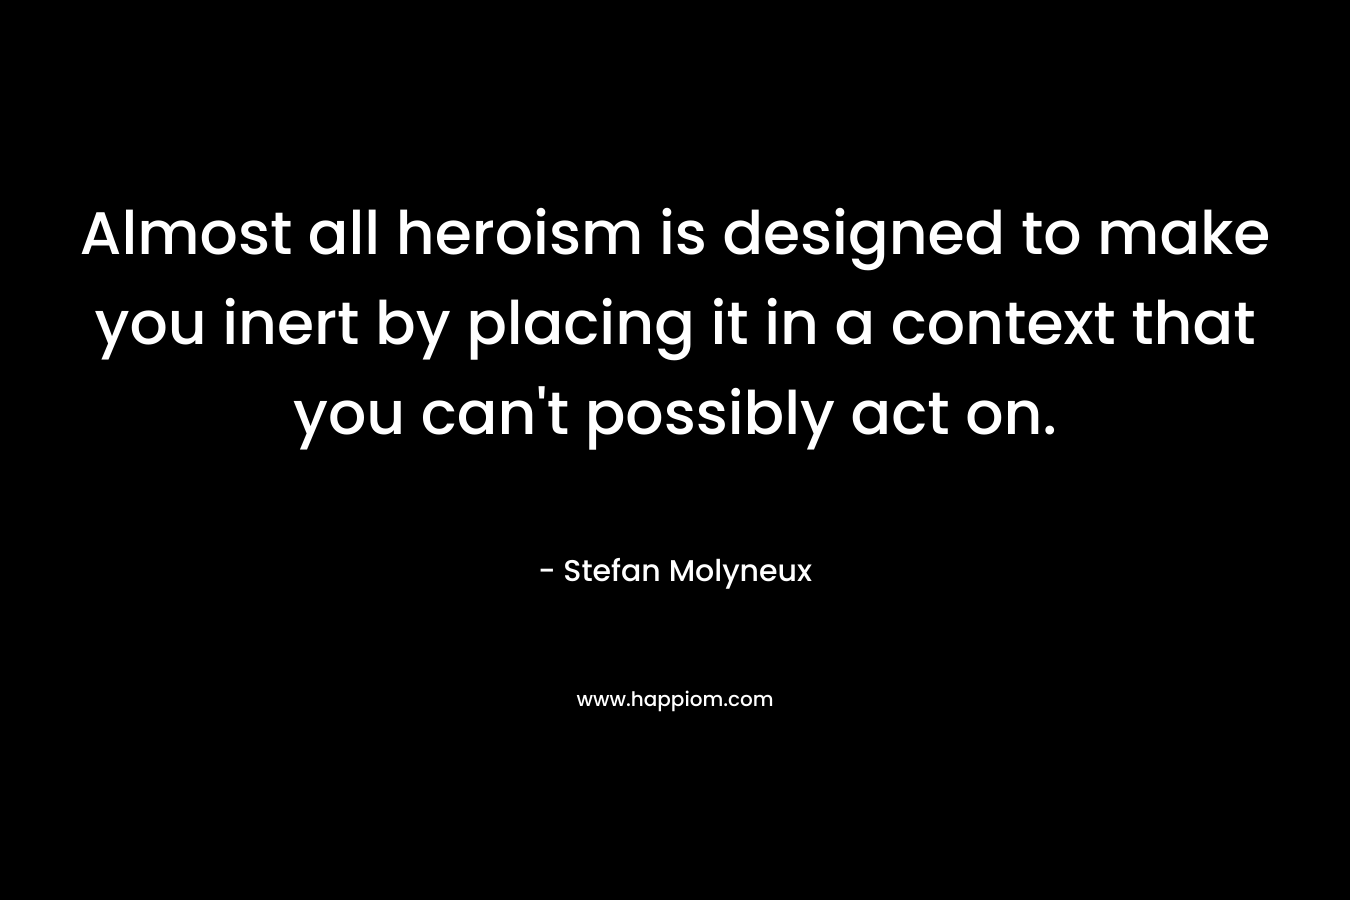 Almost all heroism is designed to make you inert by placing it in a context that you can't possibly act on.